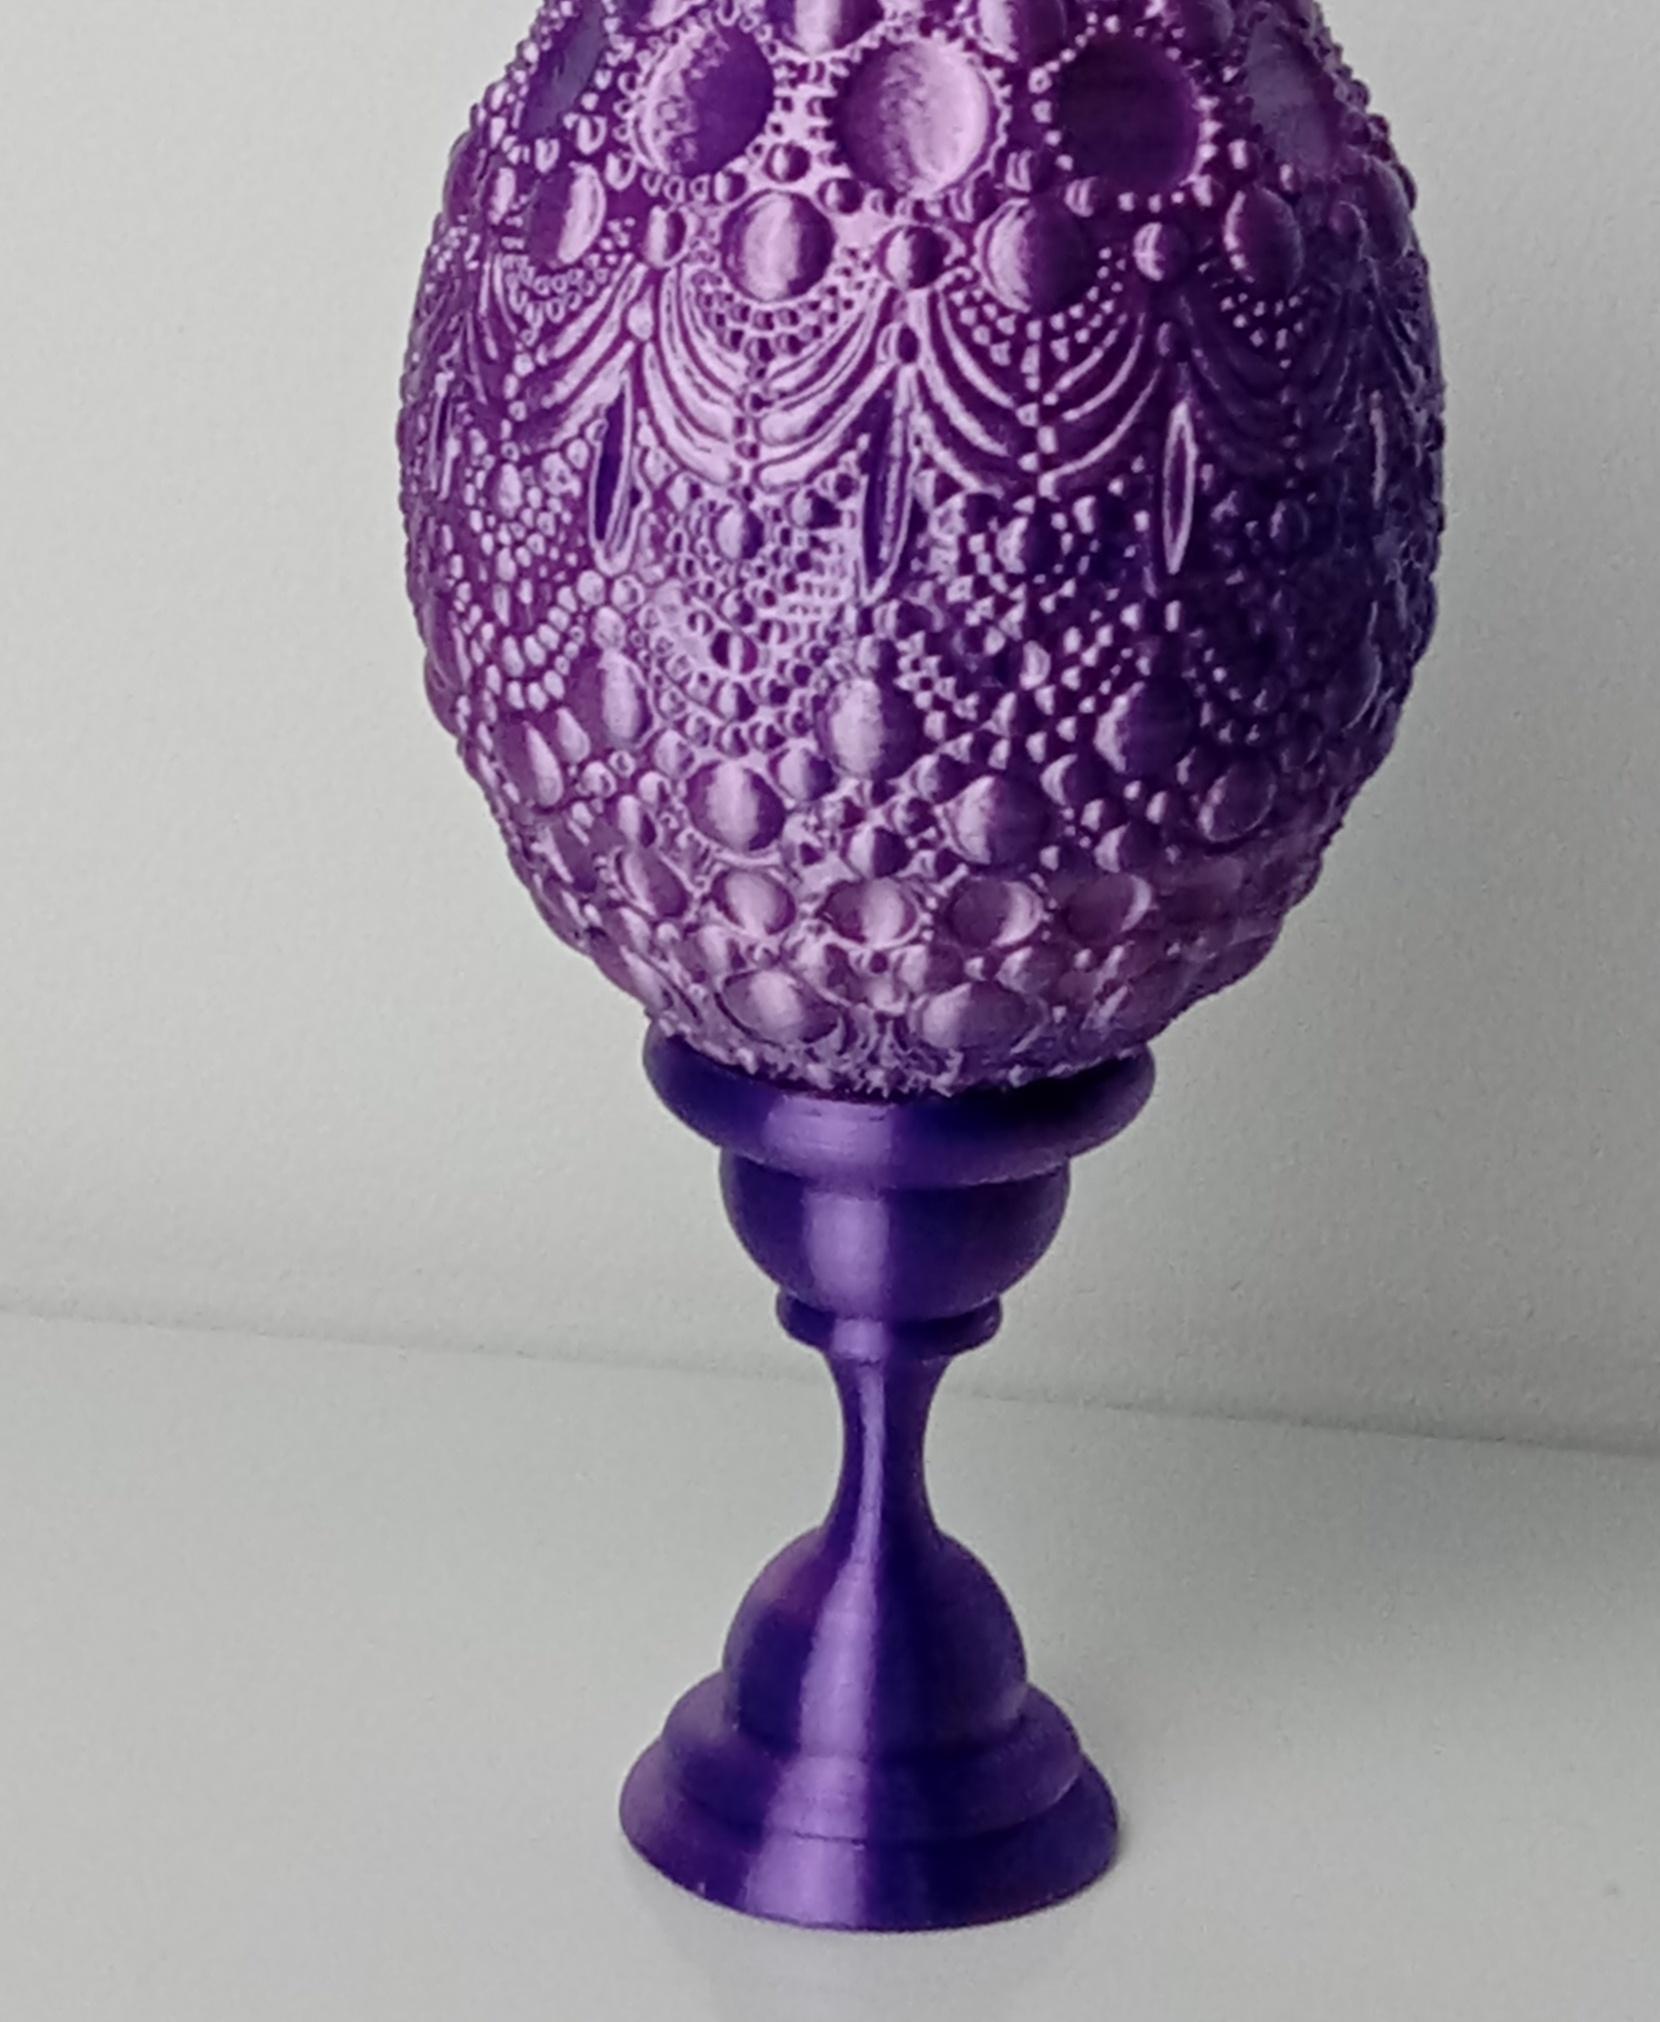 Ornate Dot Art Egg #2 Decor/Container - Printed with FormFutura High Gloss ColorMorph Pink & Purple - 3d model